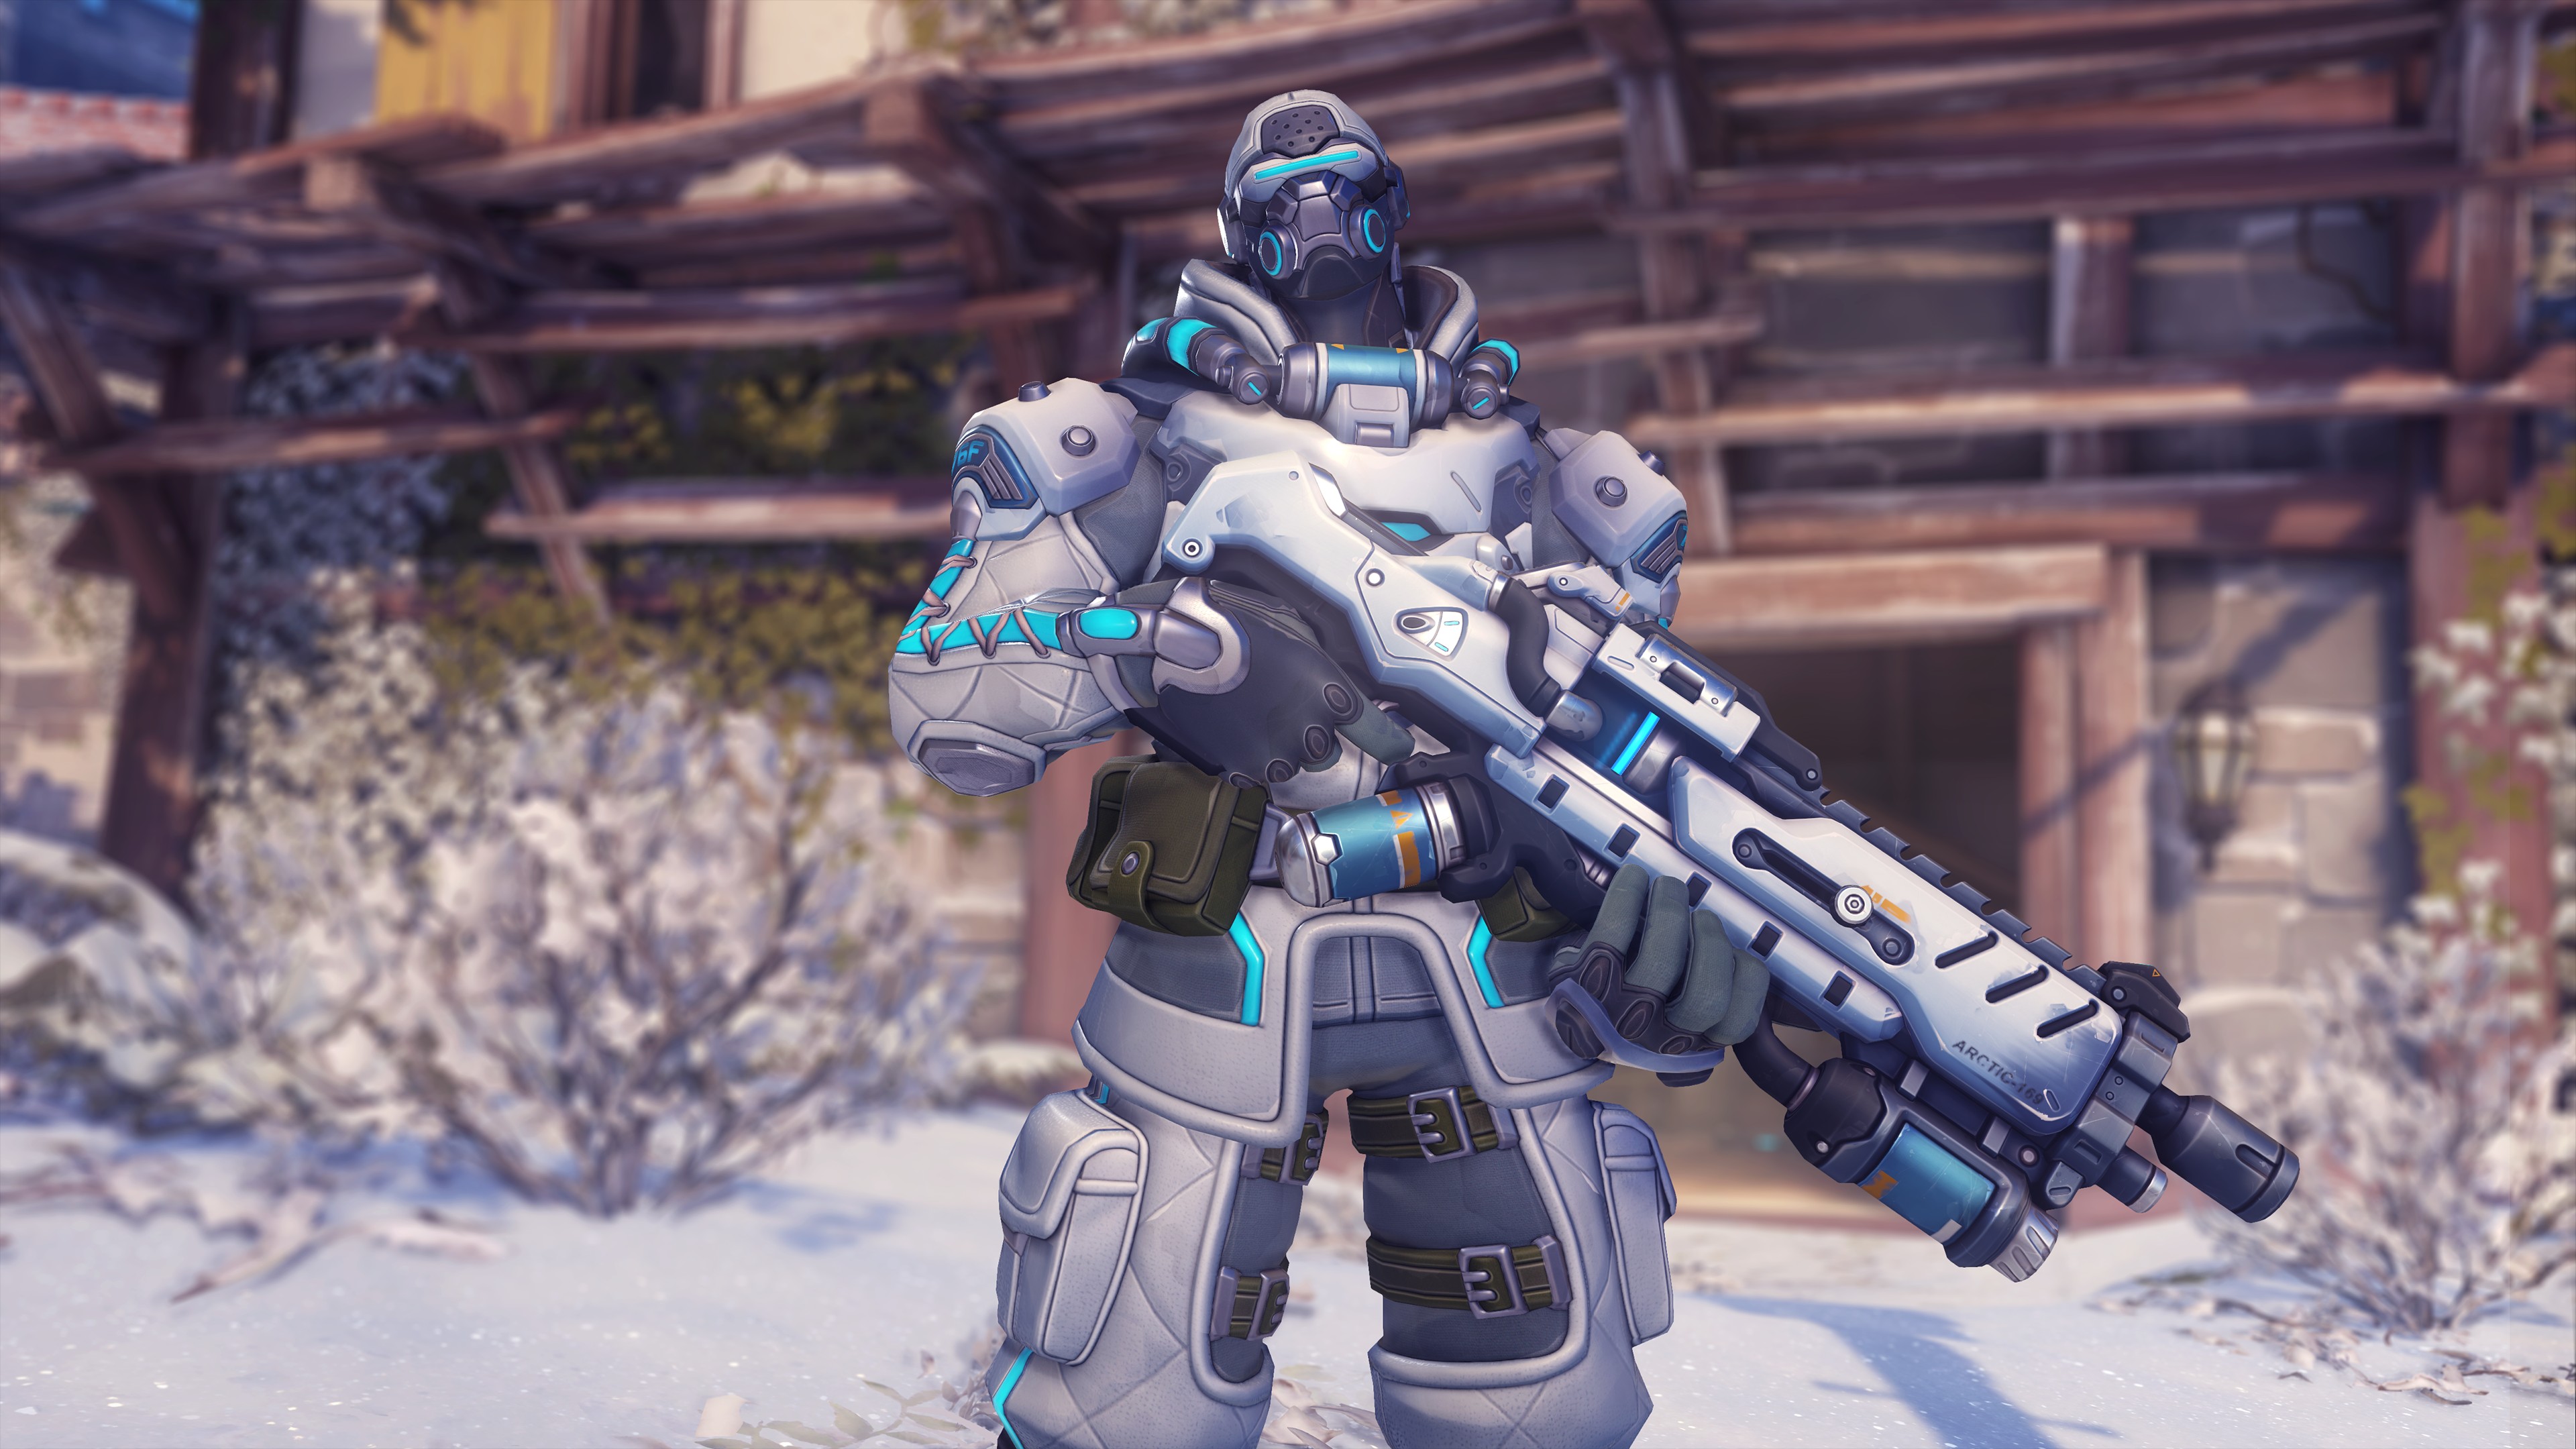 OGN drops Overwatch Apex tournament after Contenders league snub PC Gamer